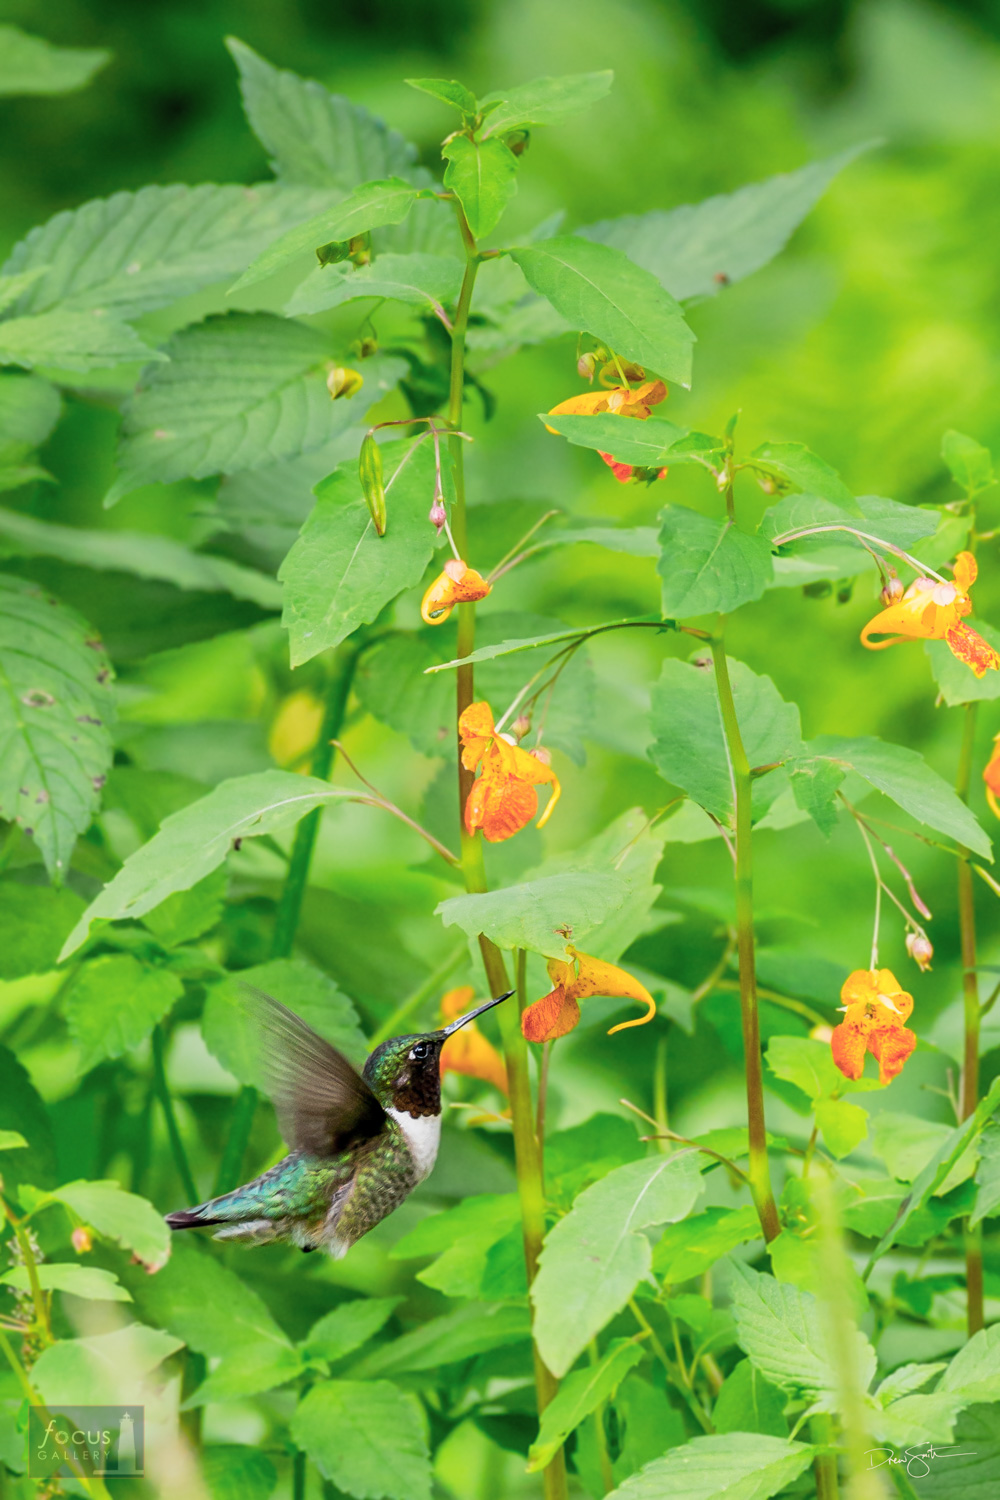 A male Ruby-throated Hummingbird feeds on nectar from jewelweed blossoms.